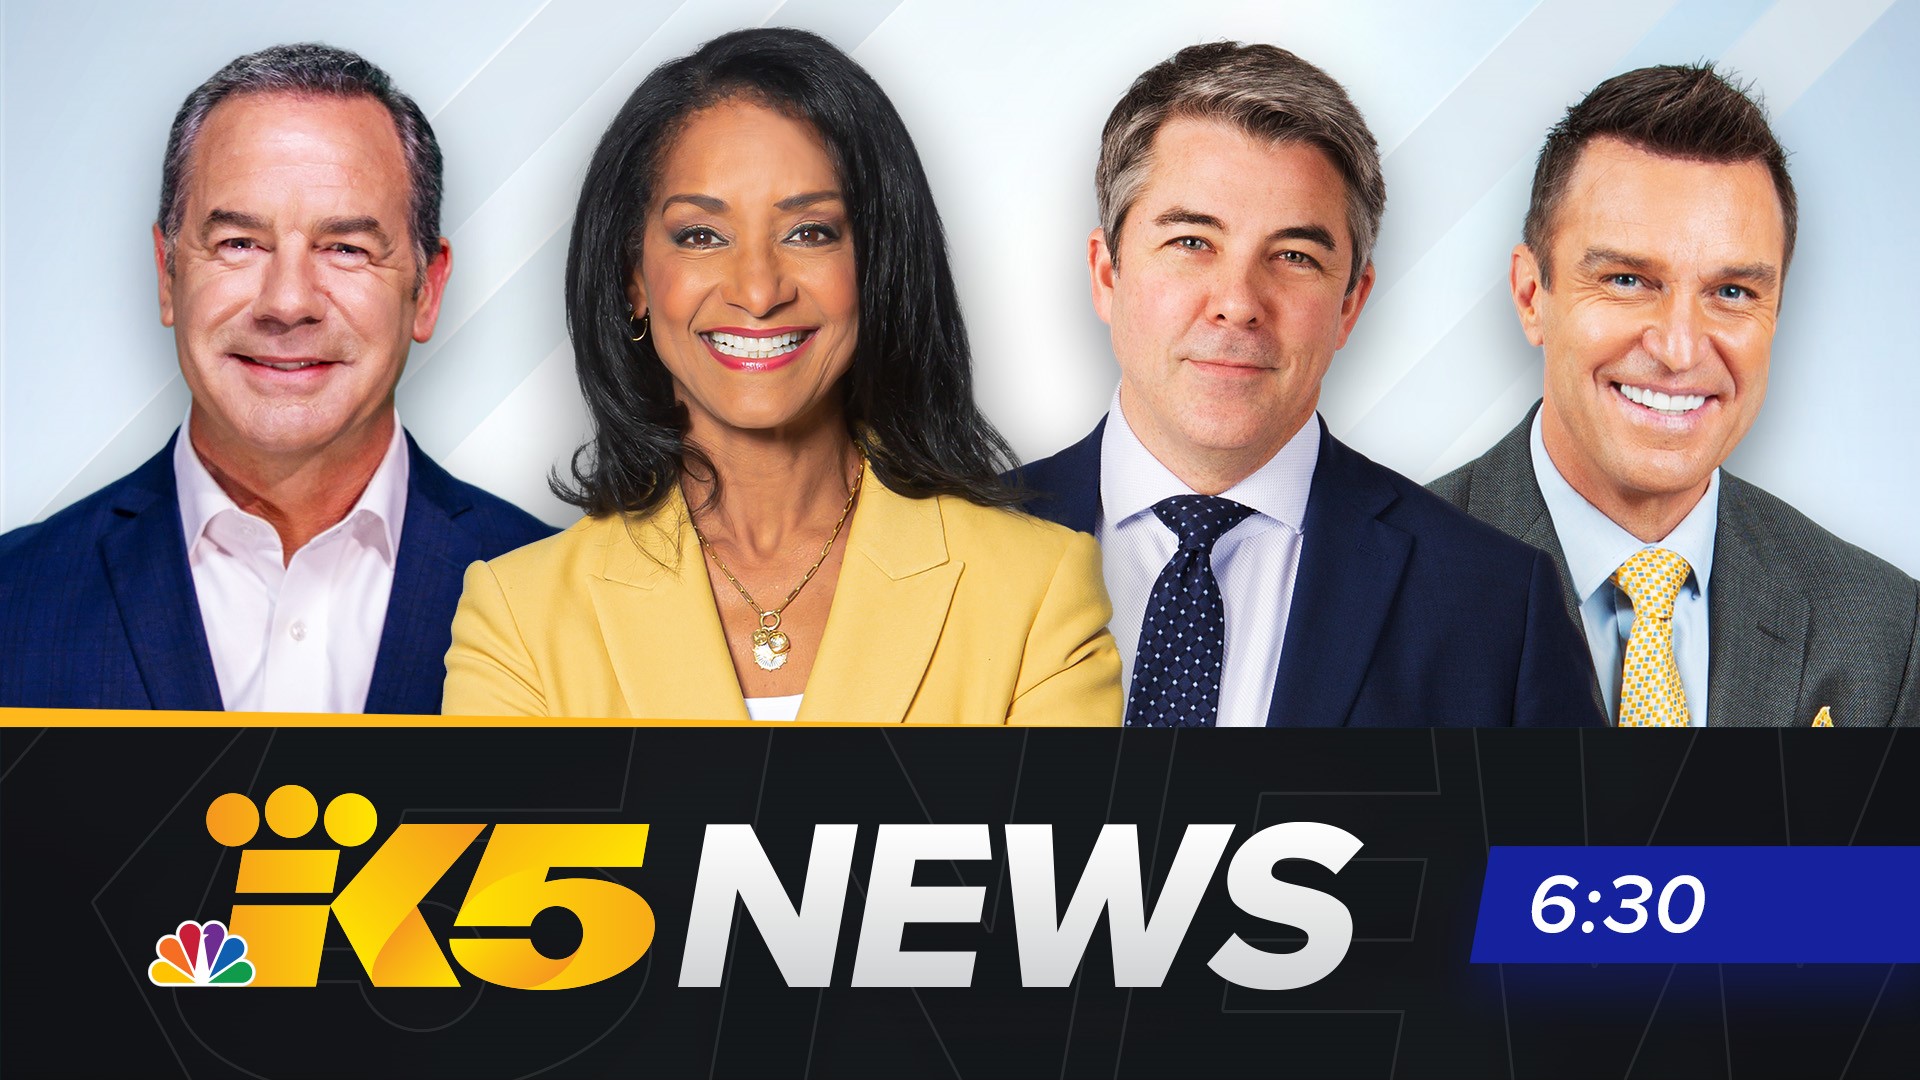 The KING 5 News Team provides the latest on the major news events of the day impacting western Washington along with the latest weather, traffic and sports updates.